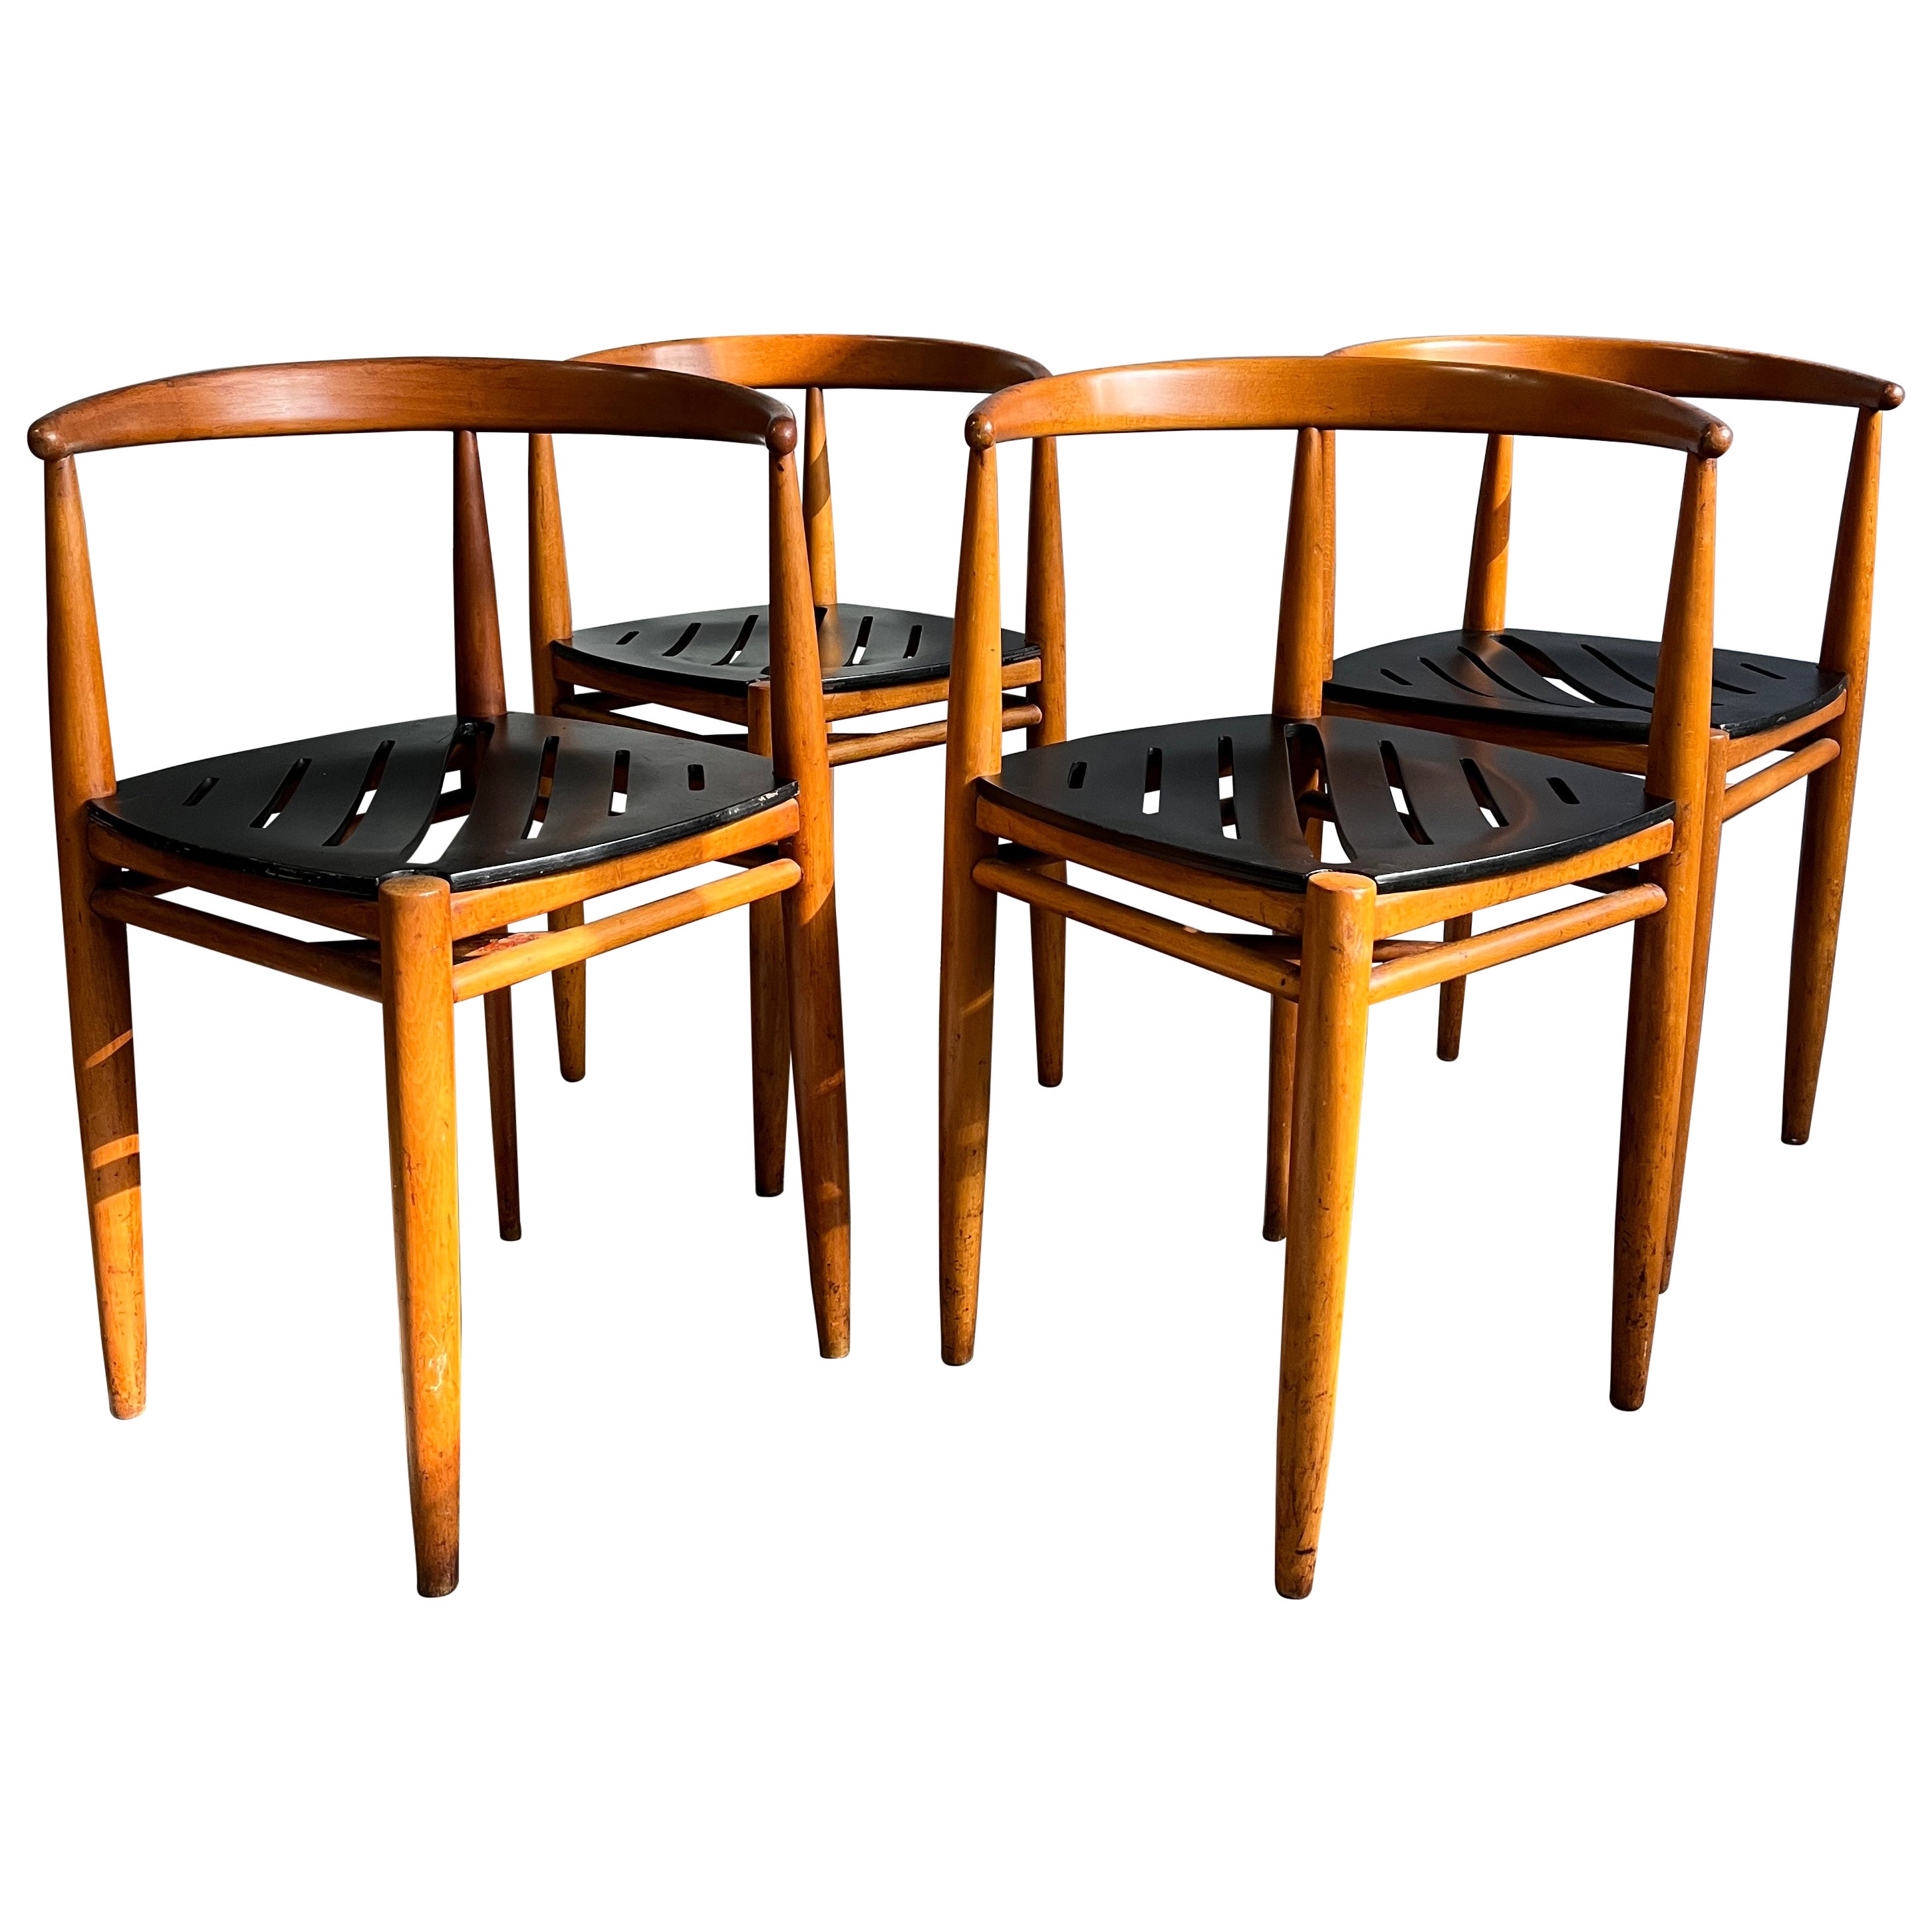 Beautiful sexy of 4 chairs boy Gemla Sweden. Warm patina throughout. They sit wonderfully stacked as a space saving feature. Sculpted black lacquered seats are as comfortable as they are beautiful to look at. Sold as a set of four.

Local pickup